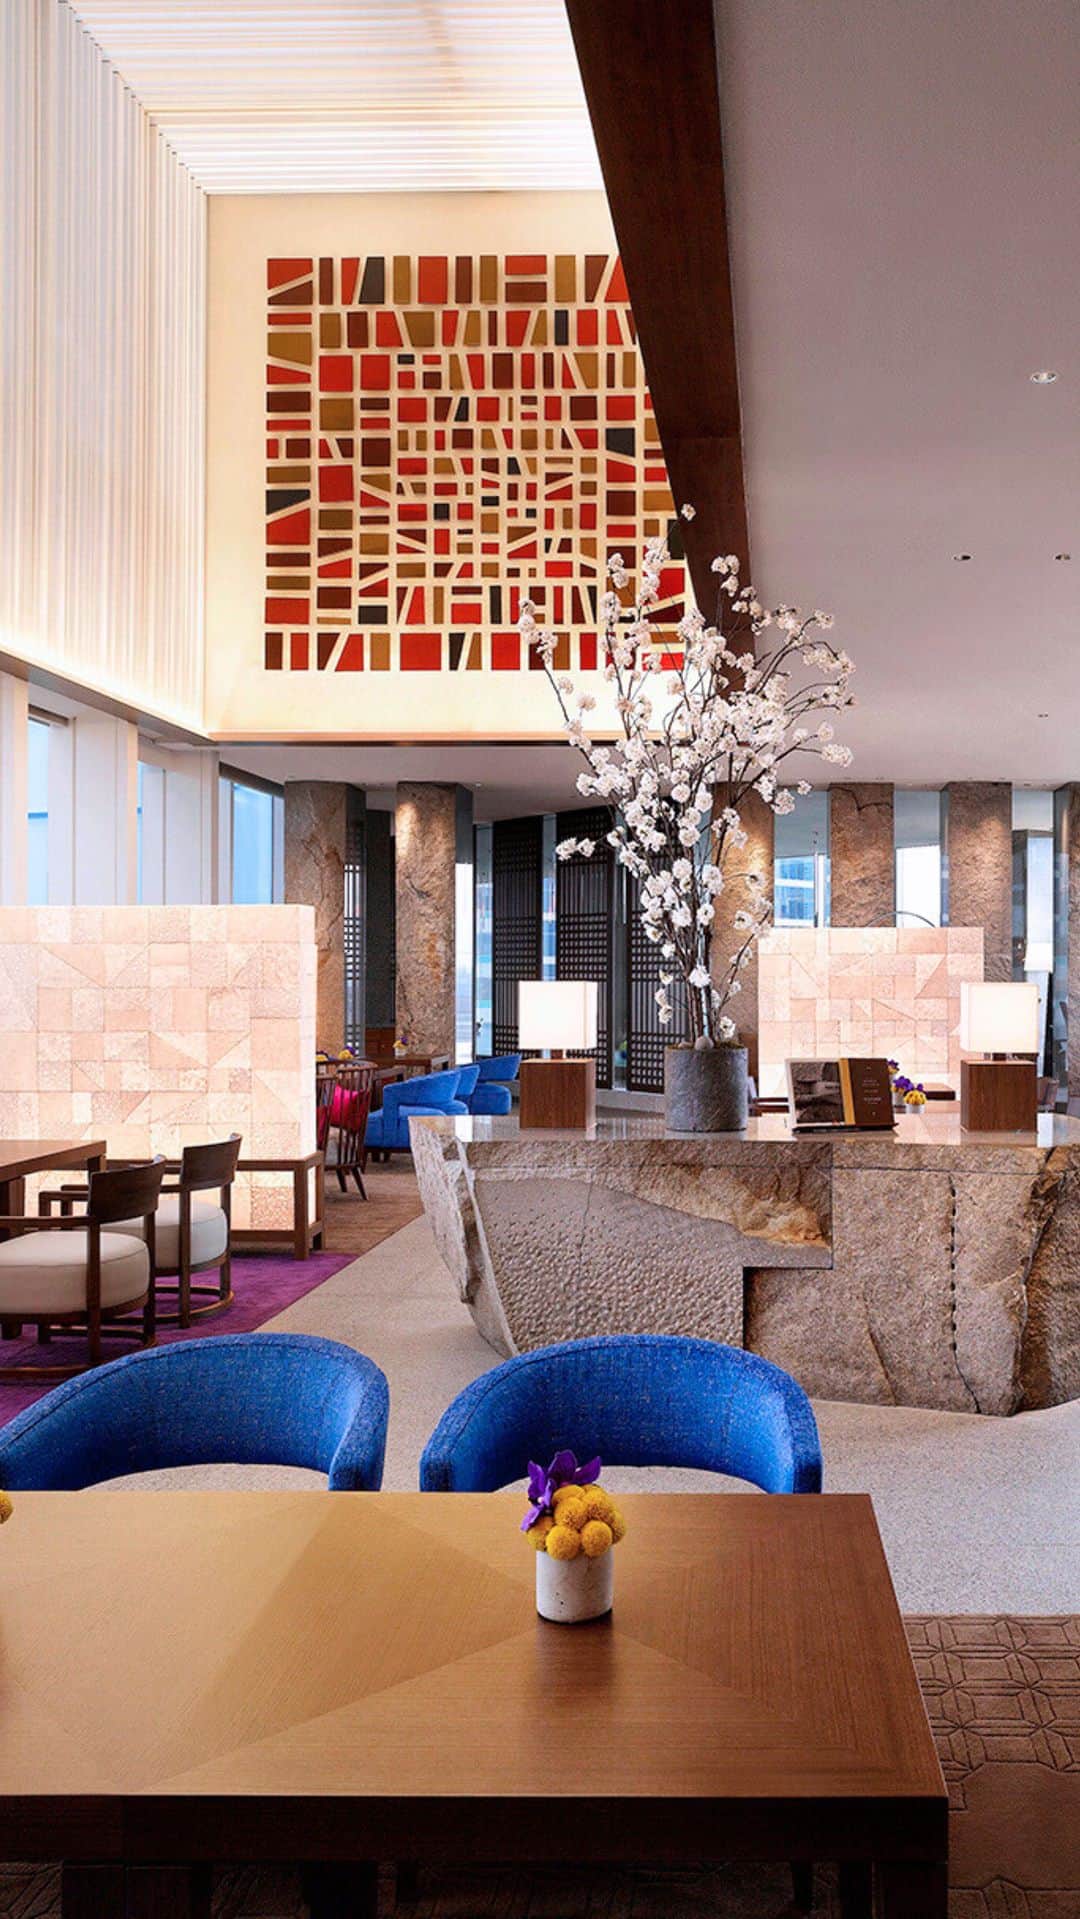 Park Hyatt Tokyo / パーク ハイアット東京のインスタグラム：「Artistic inspiration and elegance of Korean culture converge in The Lounge at @parkhyattseoul. Discover Kim Shin’s "bojagi" (wrapping cloth) paintings which express wishes for happiness, longevity, and respect through colors and patterns.  Share your own images with us by tagging @parkhyatttokyo  ————————————————————— #parkhyatttokyo #ParkHyattSeoul #TheLounge #ParkHyatt​ #WorldofHyatt #LuxuryisPersonal #LuxuryHotel #Artstagram #ArtLover #HotelDesign ​ @ParkHyattSeoul @Hyatt @ParkHyatt ​」